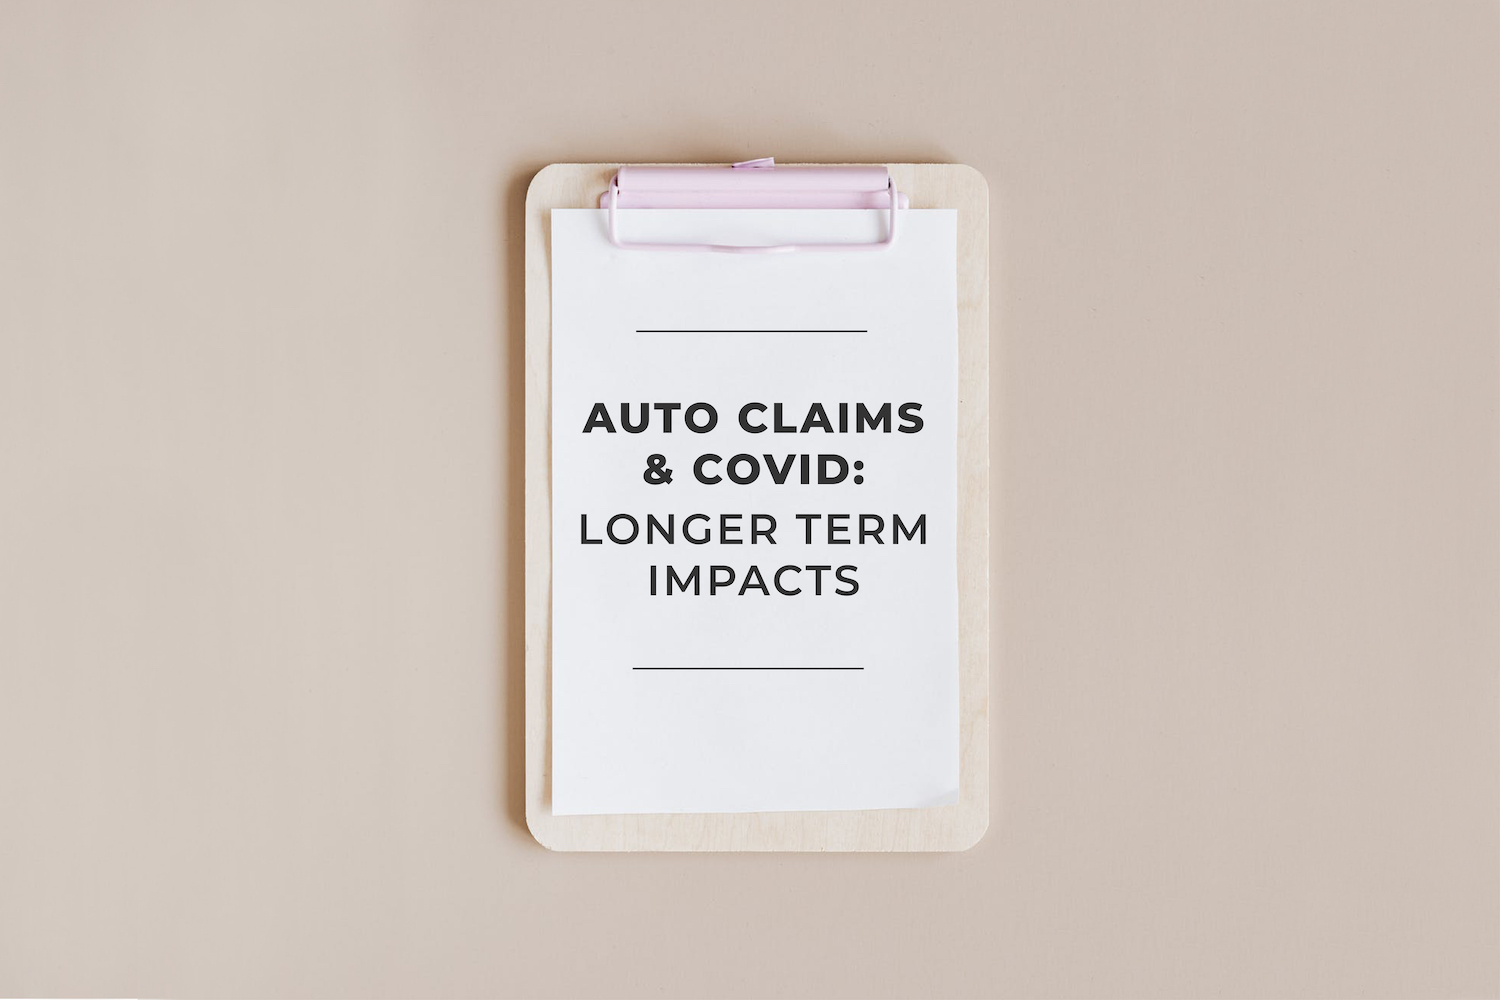 Now, as we see vehicle miles traveled and claim frequency rebound, it’s time to look at some longer-term impacts of the pandemic on auto claims.